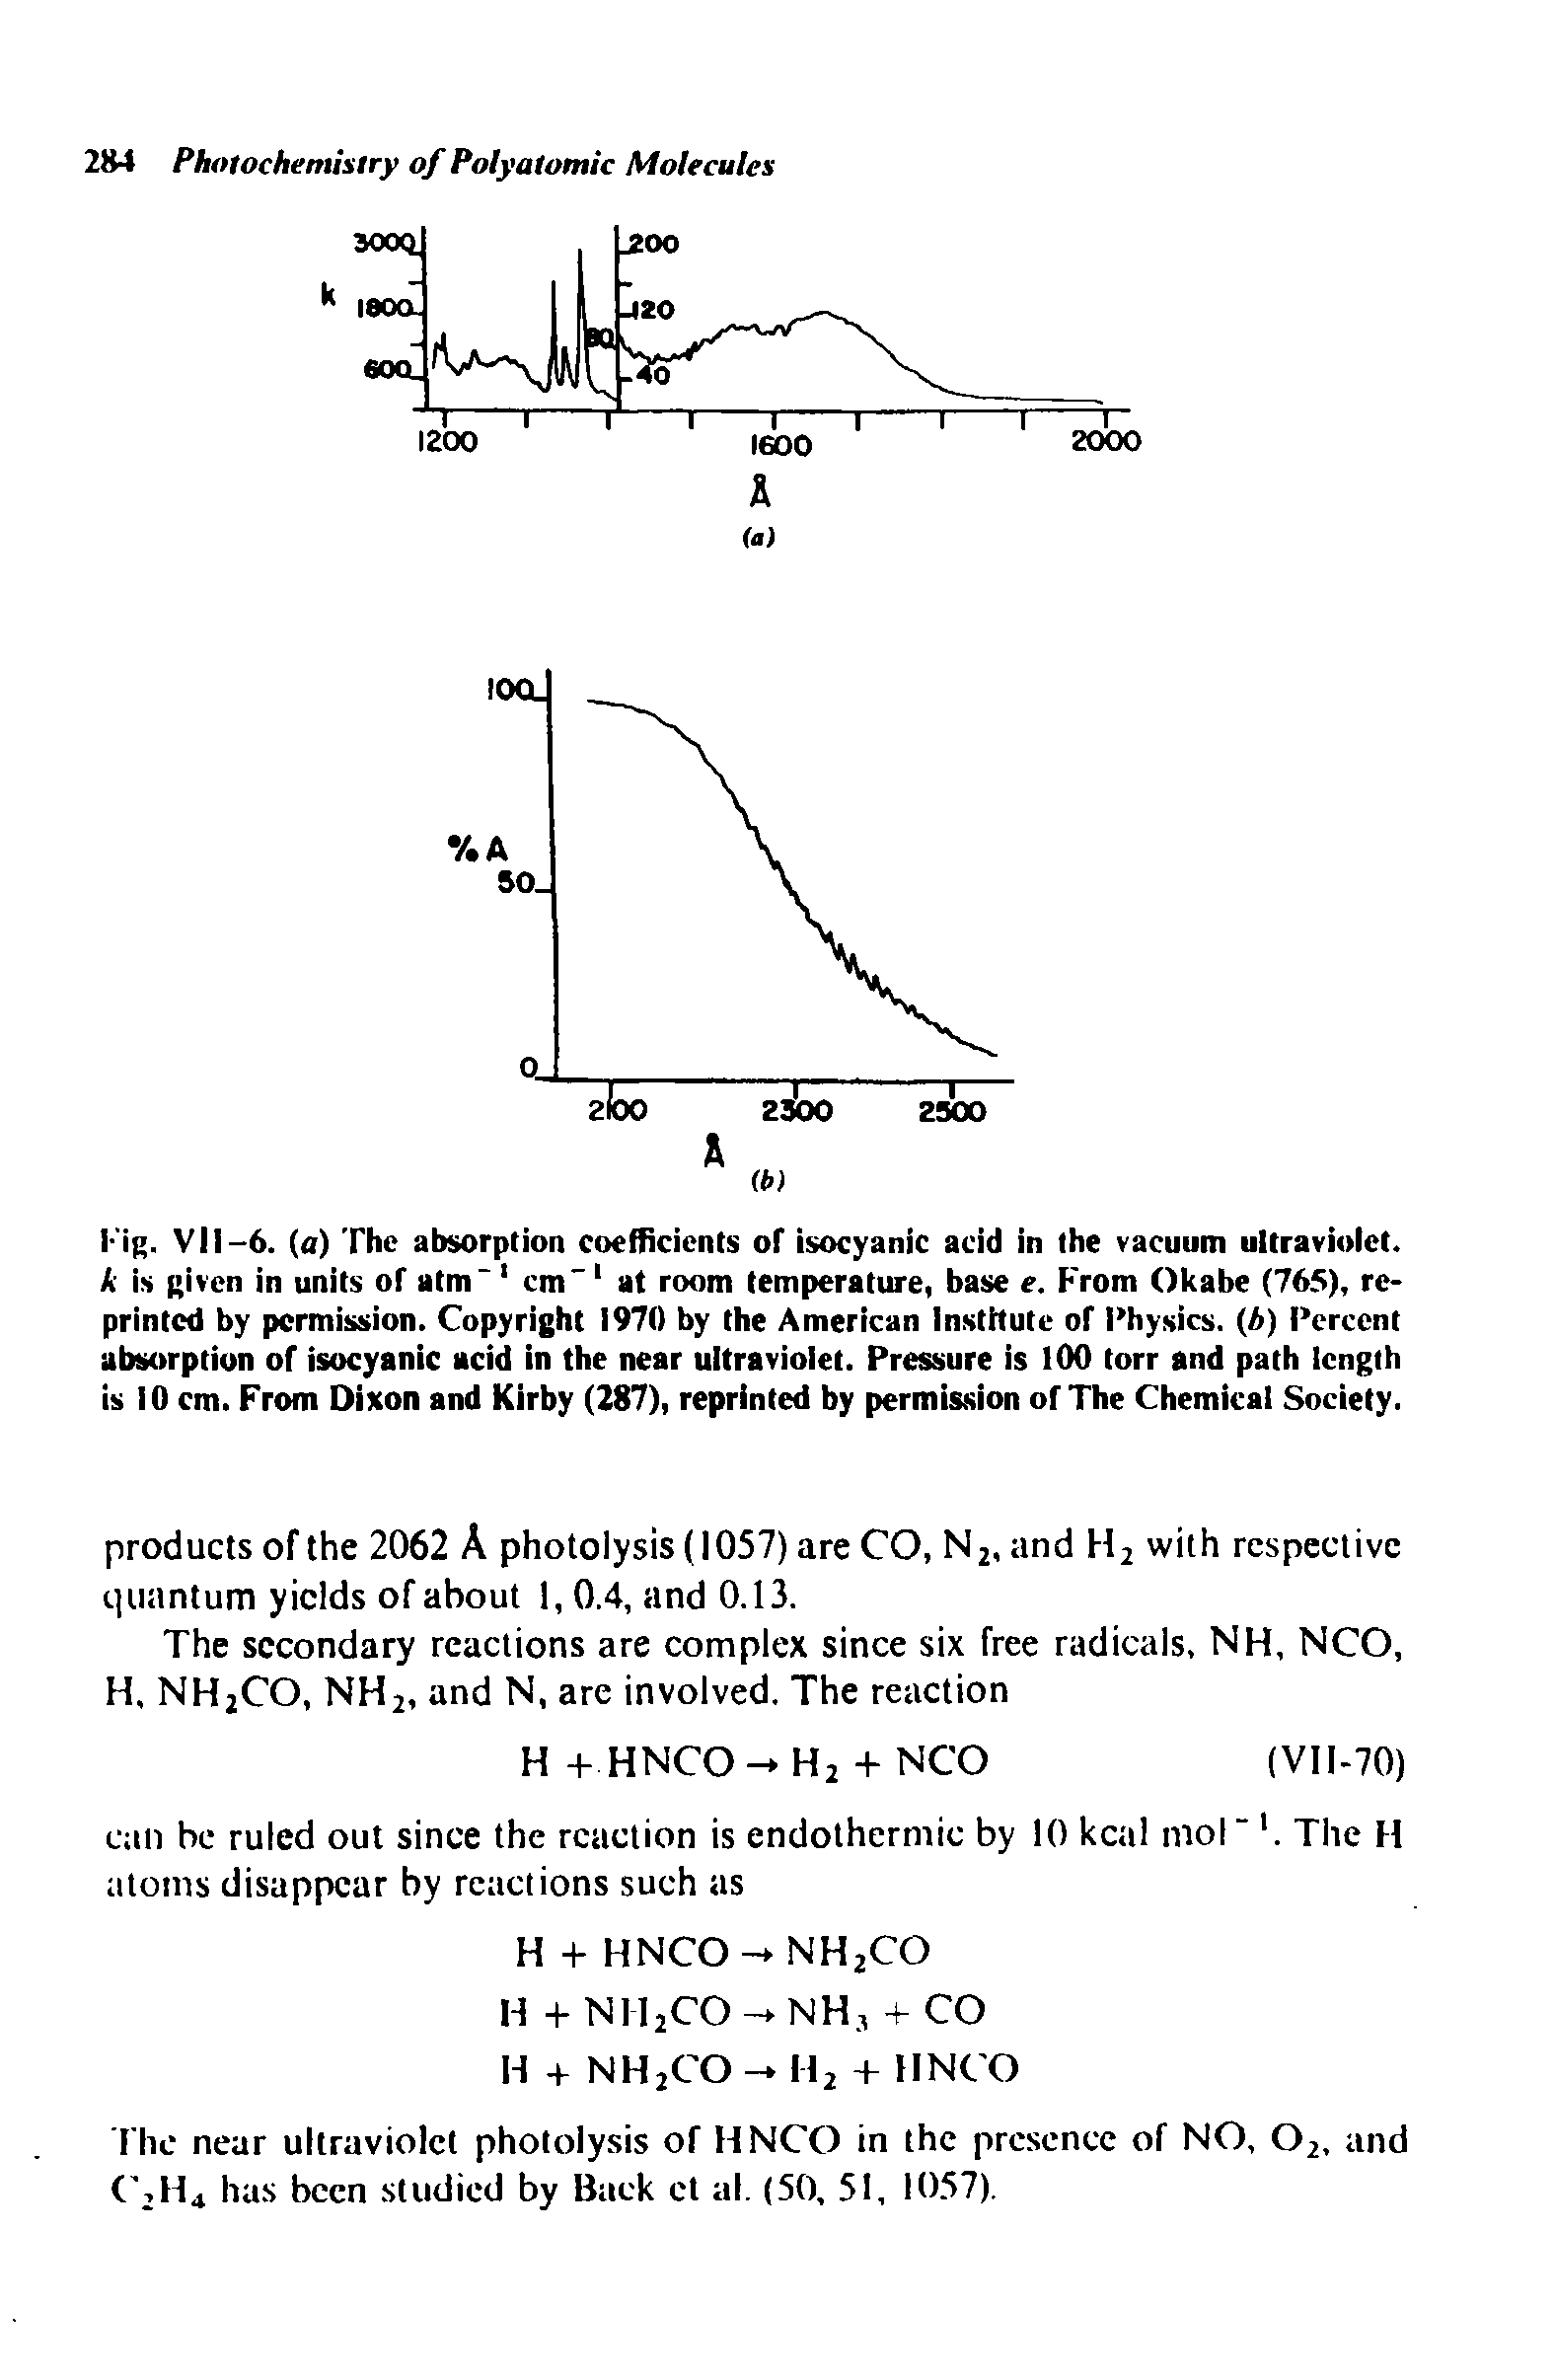 Fig. VII-6. (a) The absorption coefficients of isocyanic acid in the vacuum ultraviolet. k is given in units or atm 1 cm"1 at room temperature, base e. From Okabe (765), reprinted by permission. Copyright 1970 by the American Institute of Physics. (b) Percent absorption of isocyanic acid in the near ultraviolet. Pressure is 100 torr and path length is 10 cm. From Dixon and Kirby (287), reprinted by permission of The Chemical Society.